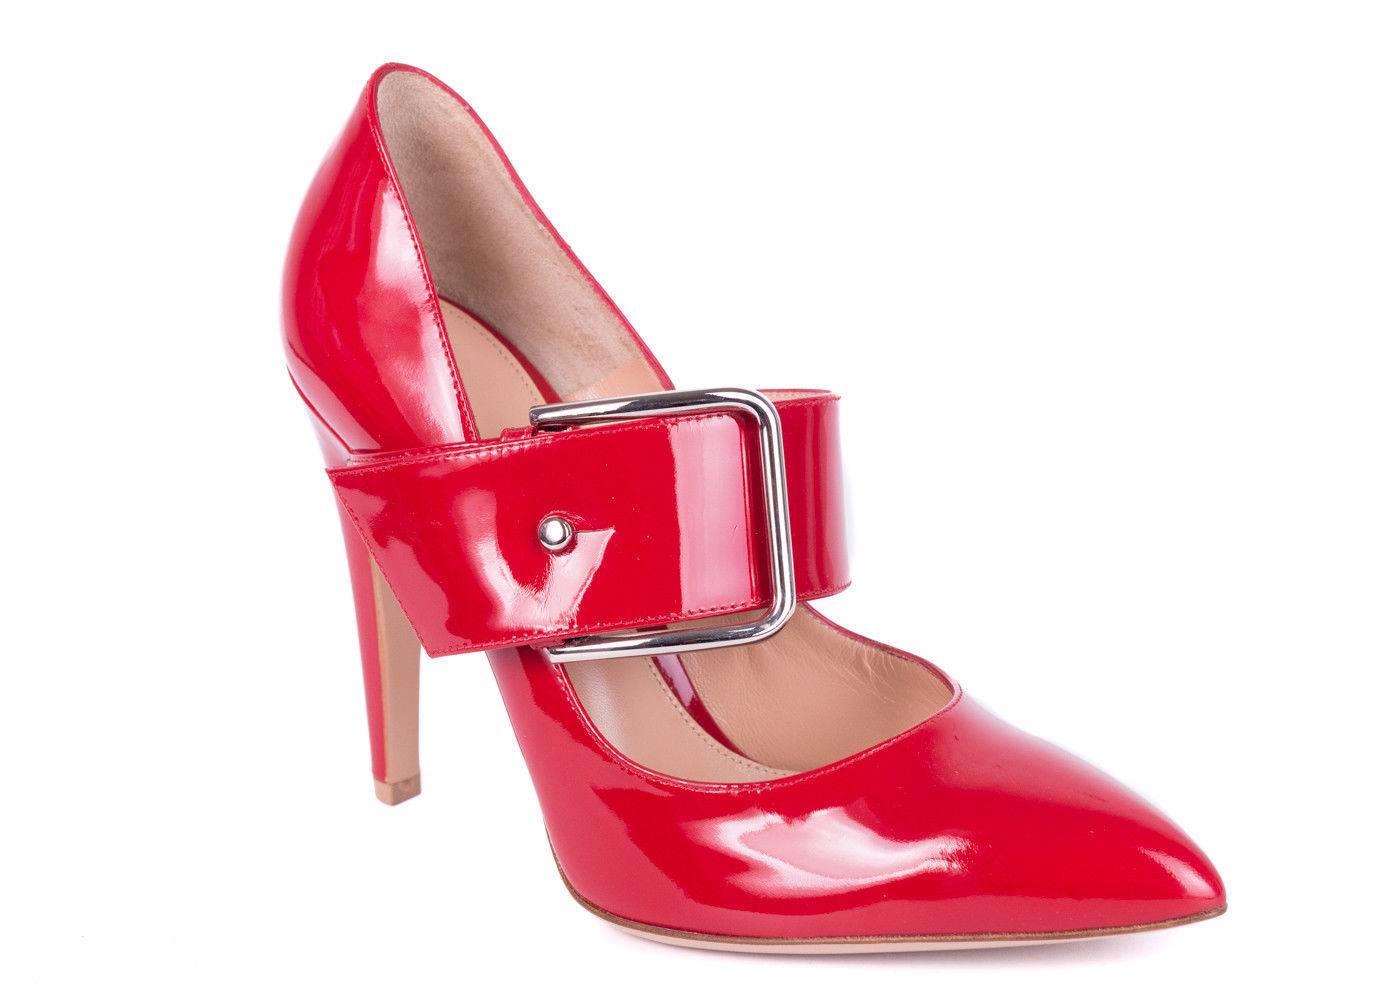 A feminine and sultry play on your classic Mary Jane silhouette, Italian designer Gianvito Rossi presents a pair of Red Patent Leather MaryJane Pointed Toe Stiletto Heels. The vivid red color is reminiscent of a fairytale story, thick strap and